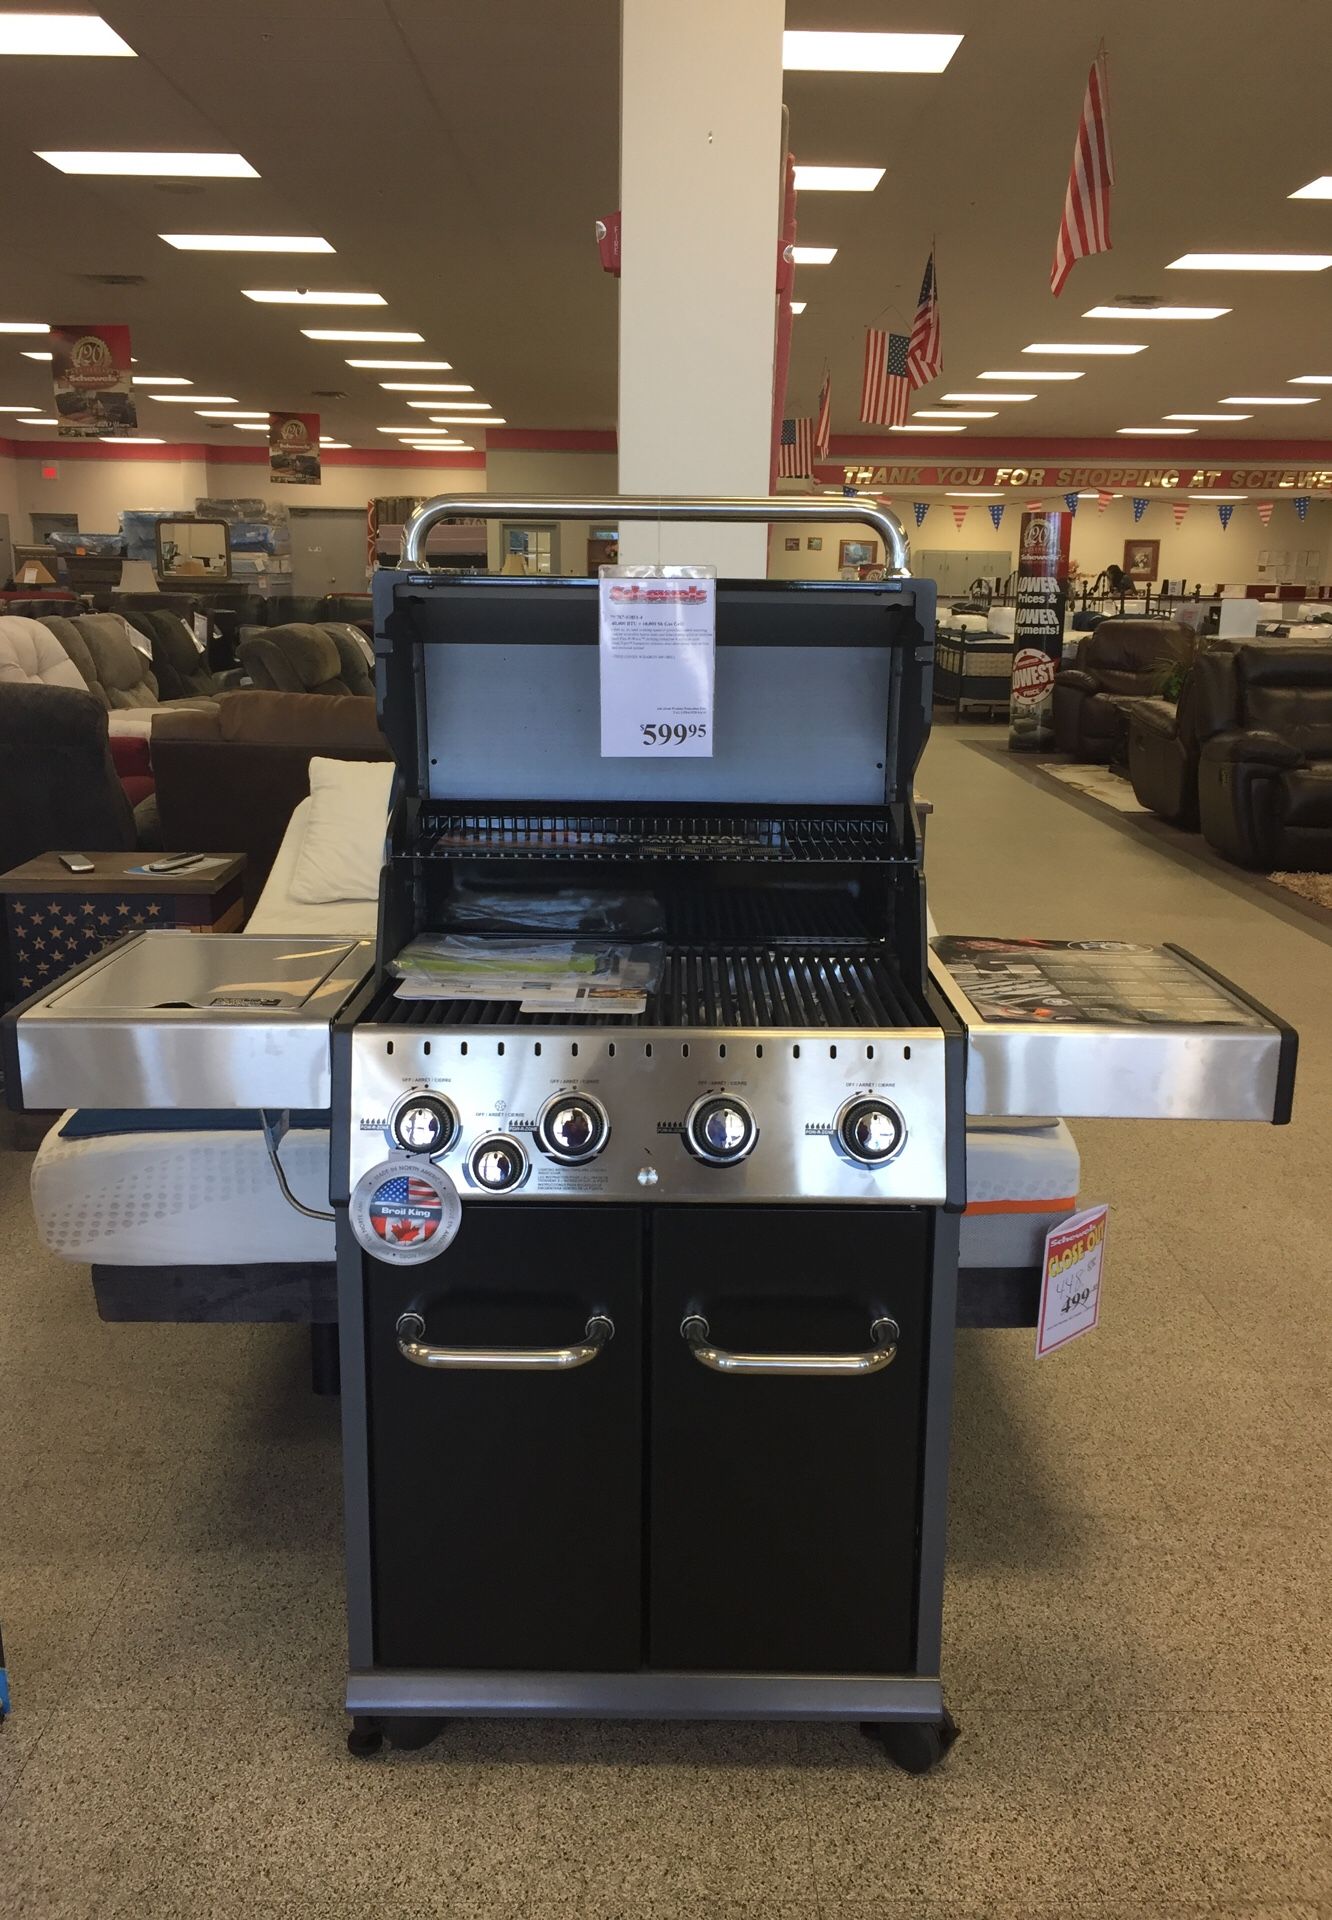 Gas grill , financing available and low monthly payments!!!!!! Take it home today it is the perfect Father’s Day gift!!!!